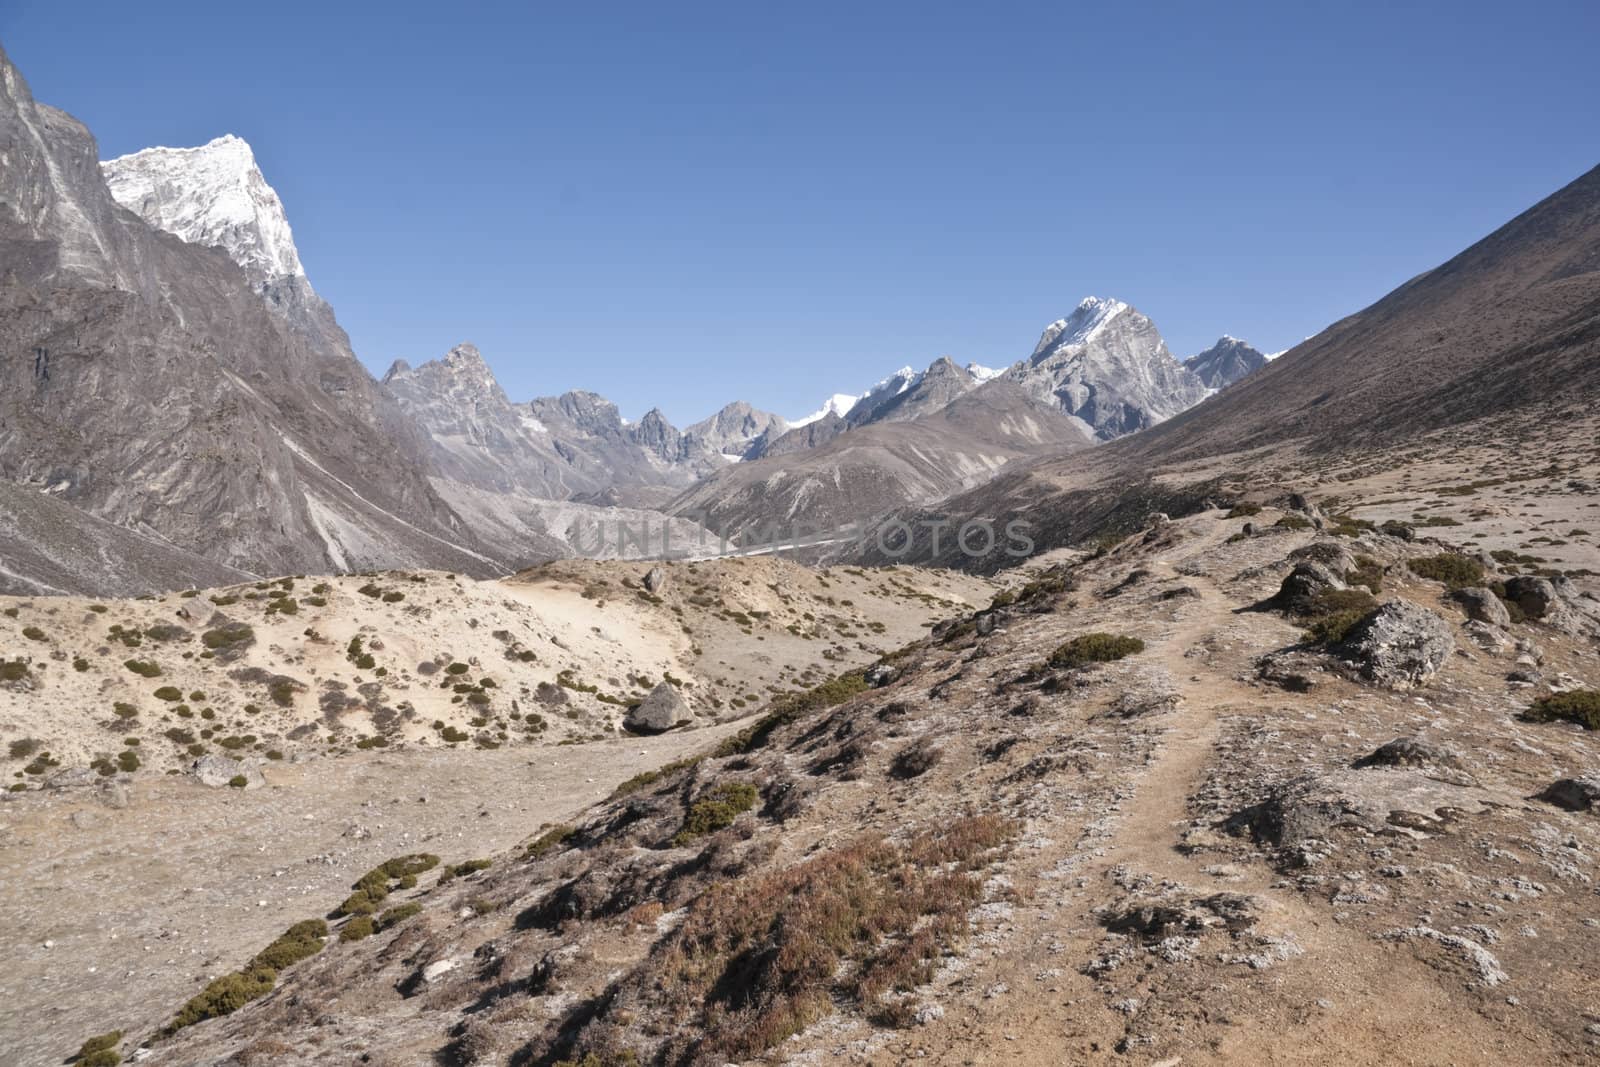 Mountain scenery around Dingboche (4410 Metres) on the trekking route to Everest Base Camp, Nepal